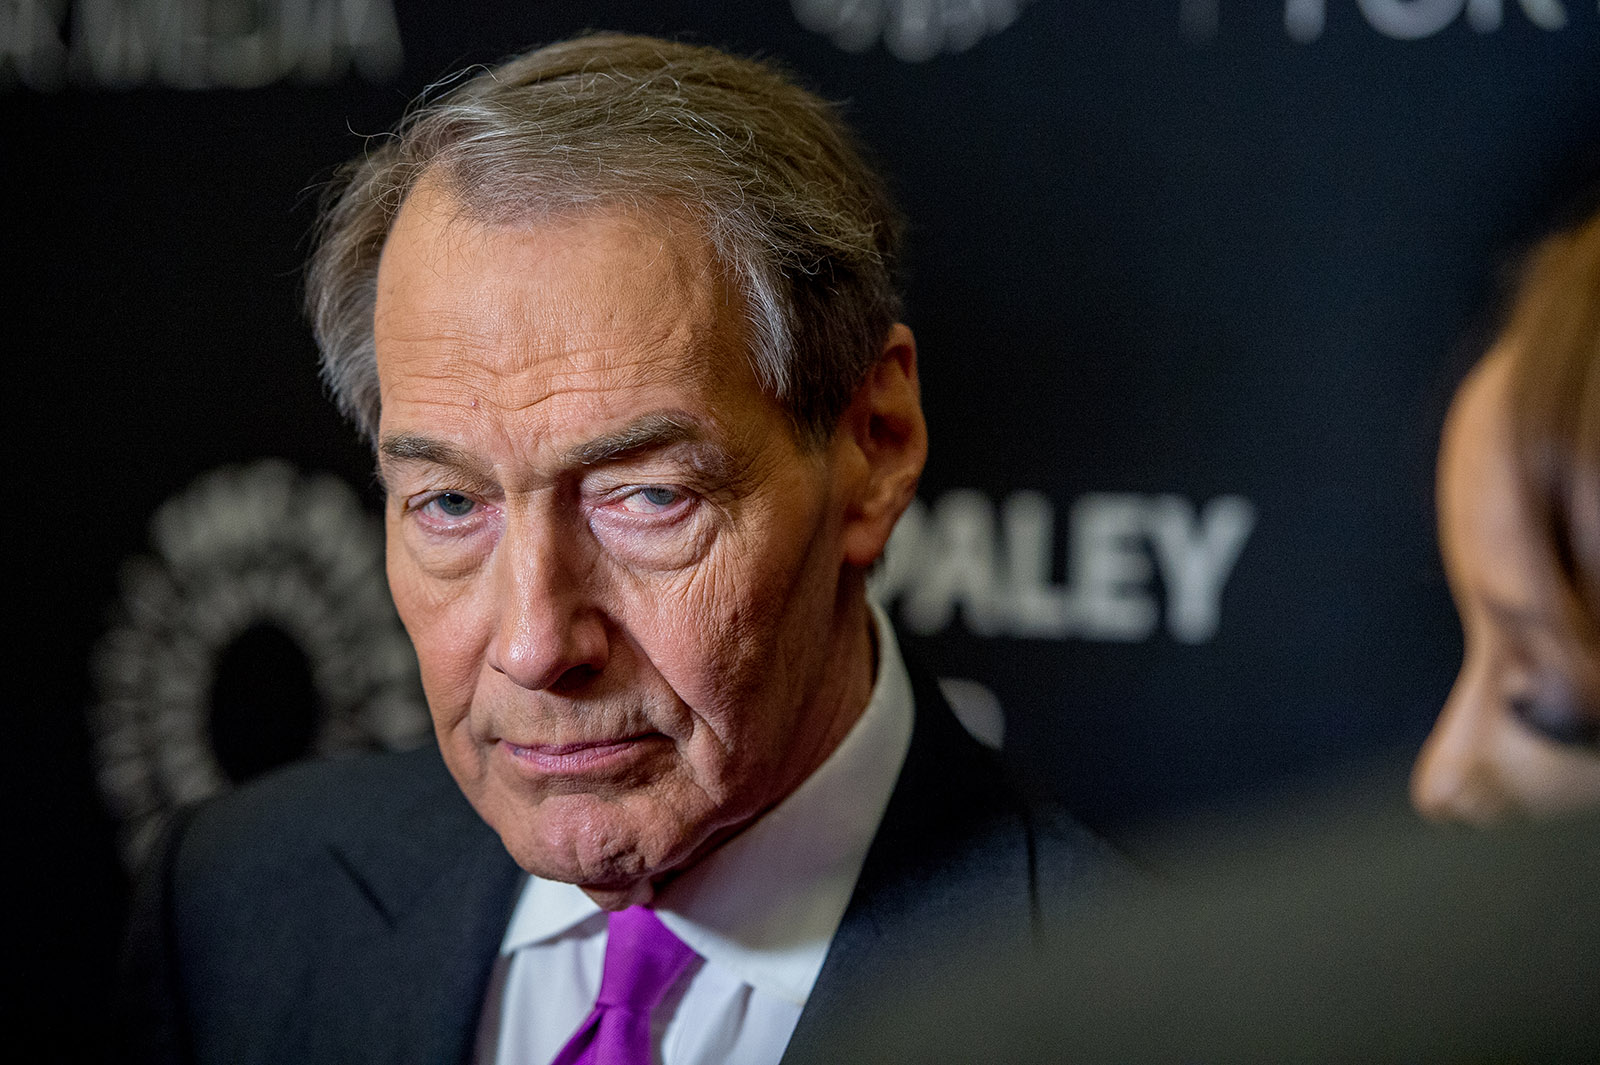 Charlie Rose attending a media function in New York City on November 1, 2017. Three weeks later, CBS and PBS cut their ties with the TV host after a number of women went public with accusations against him of sexual harassment and misconduct at work